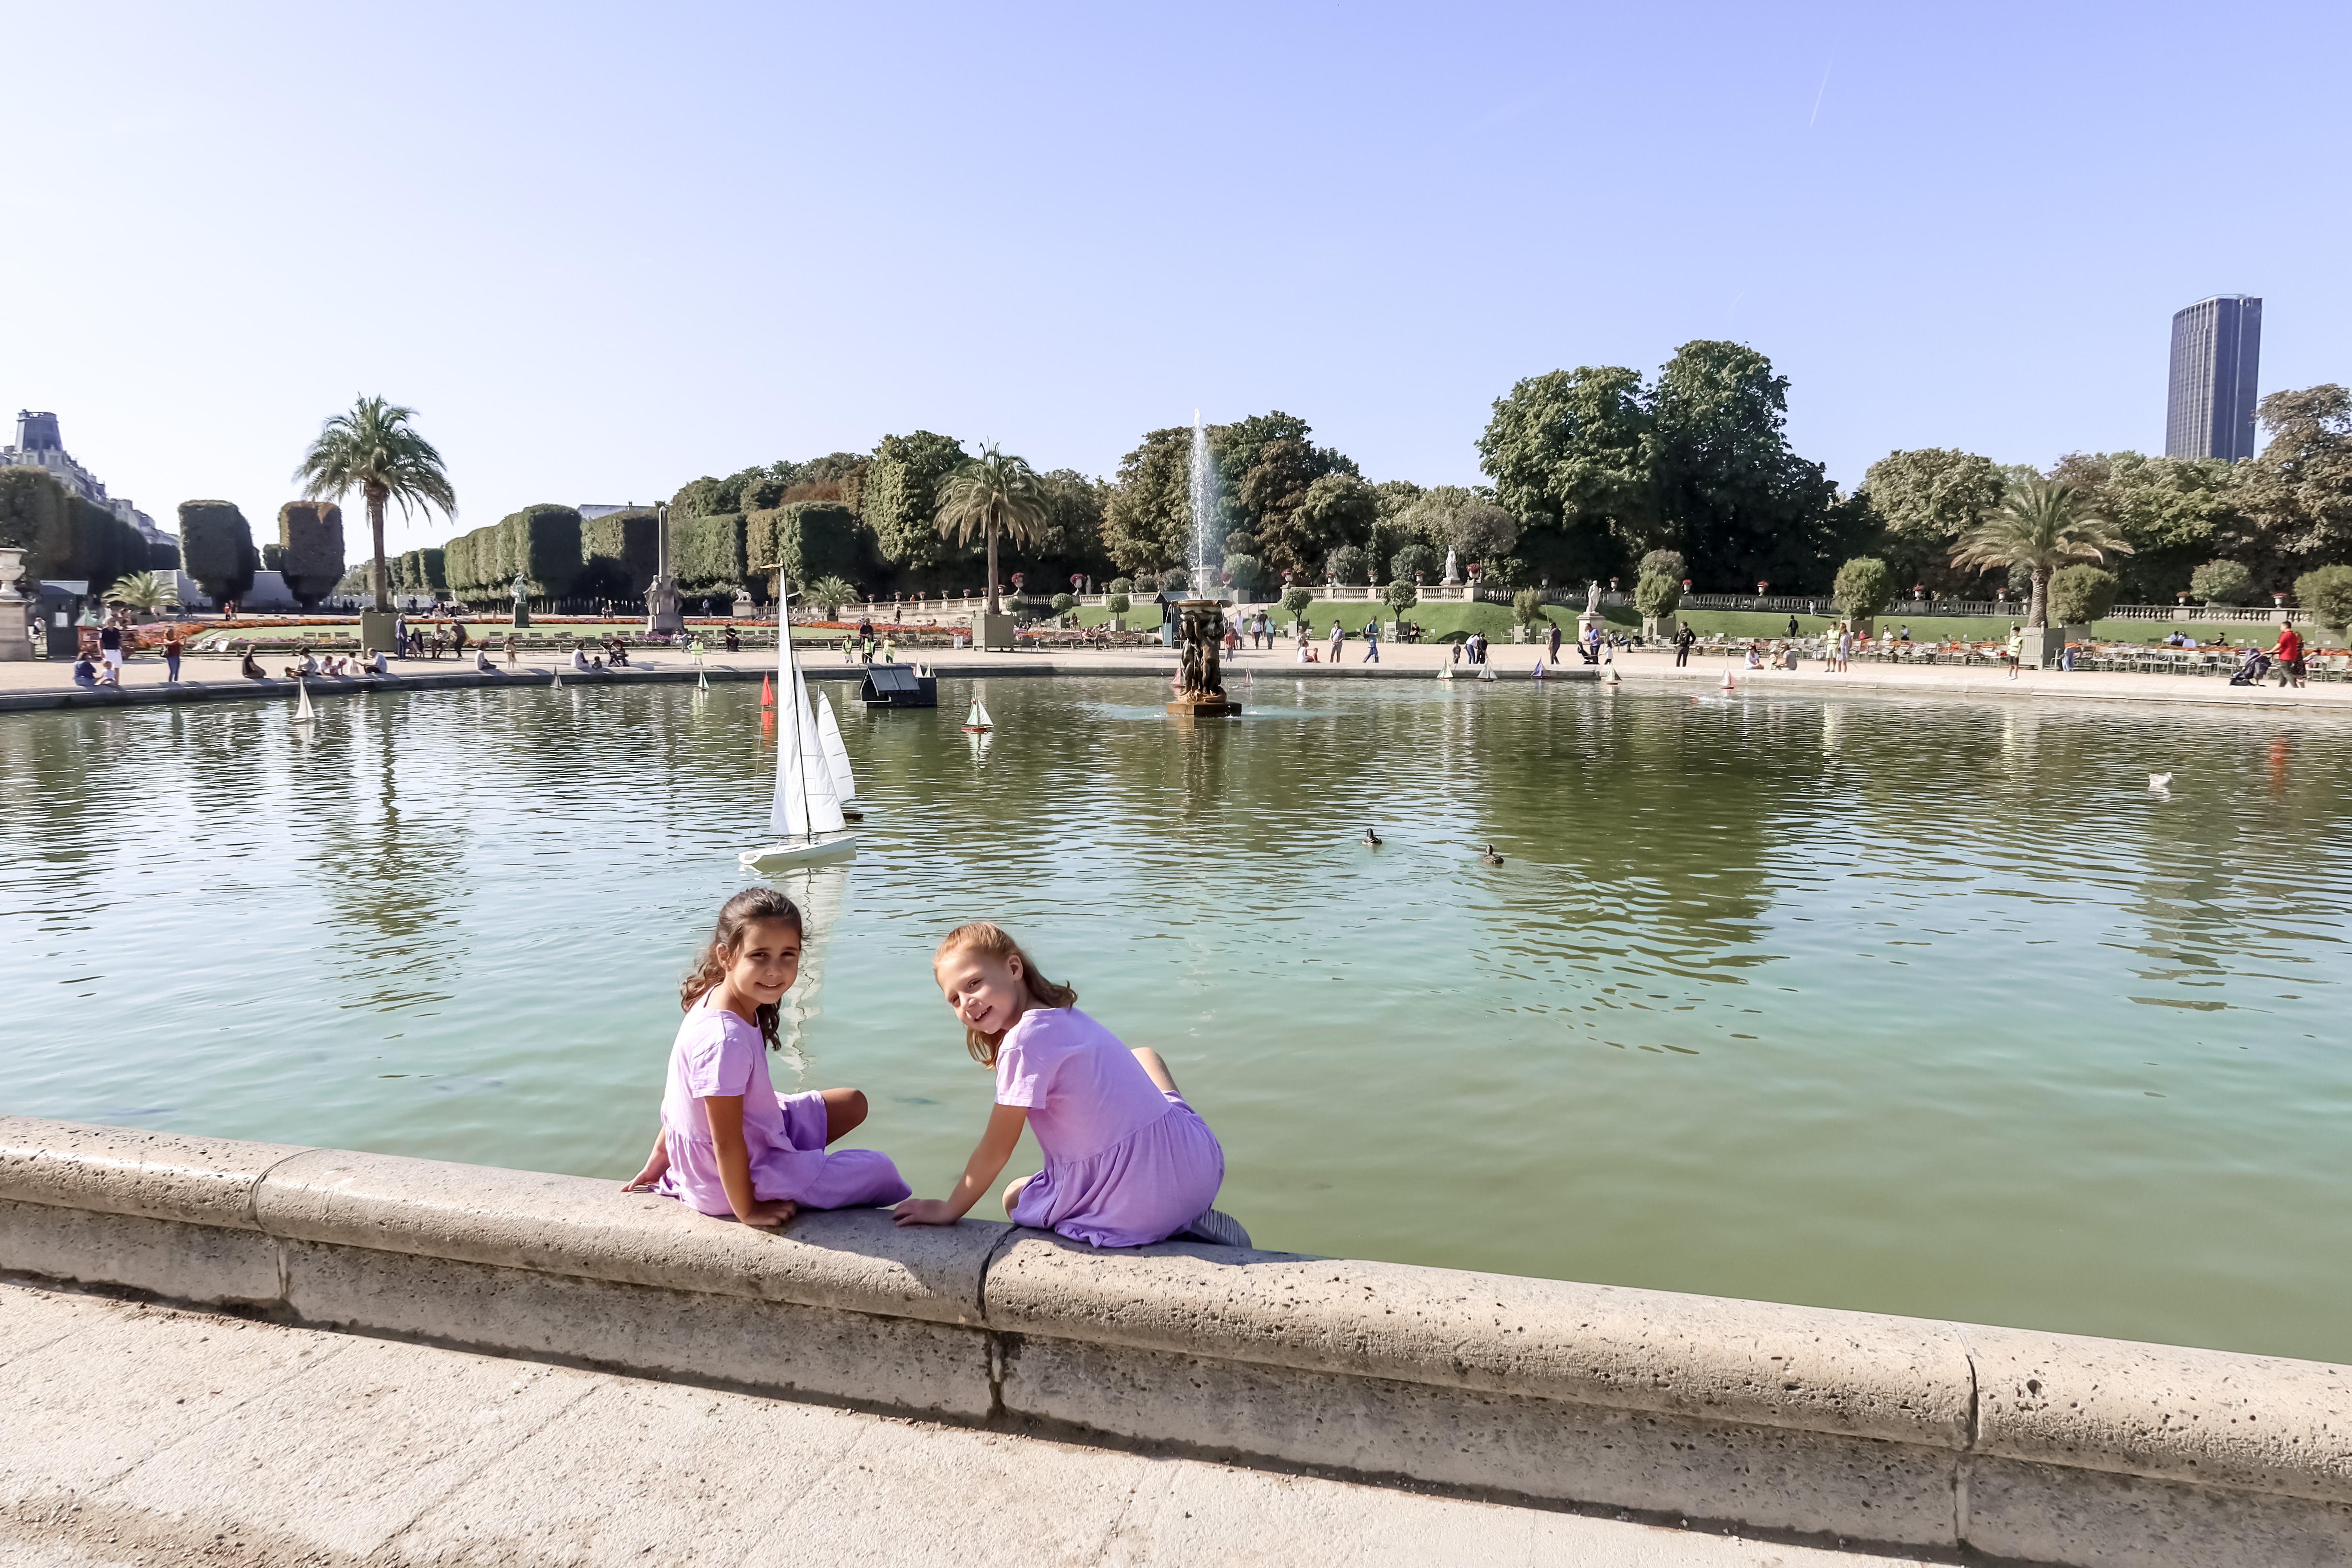 Luxembourg Gardens - One Weekend in Paris with kids